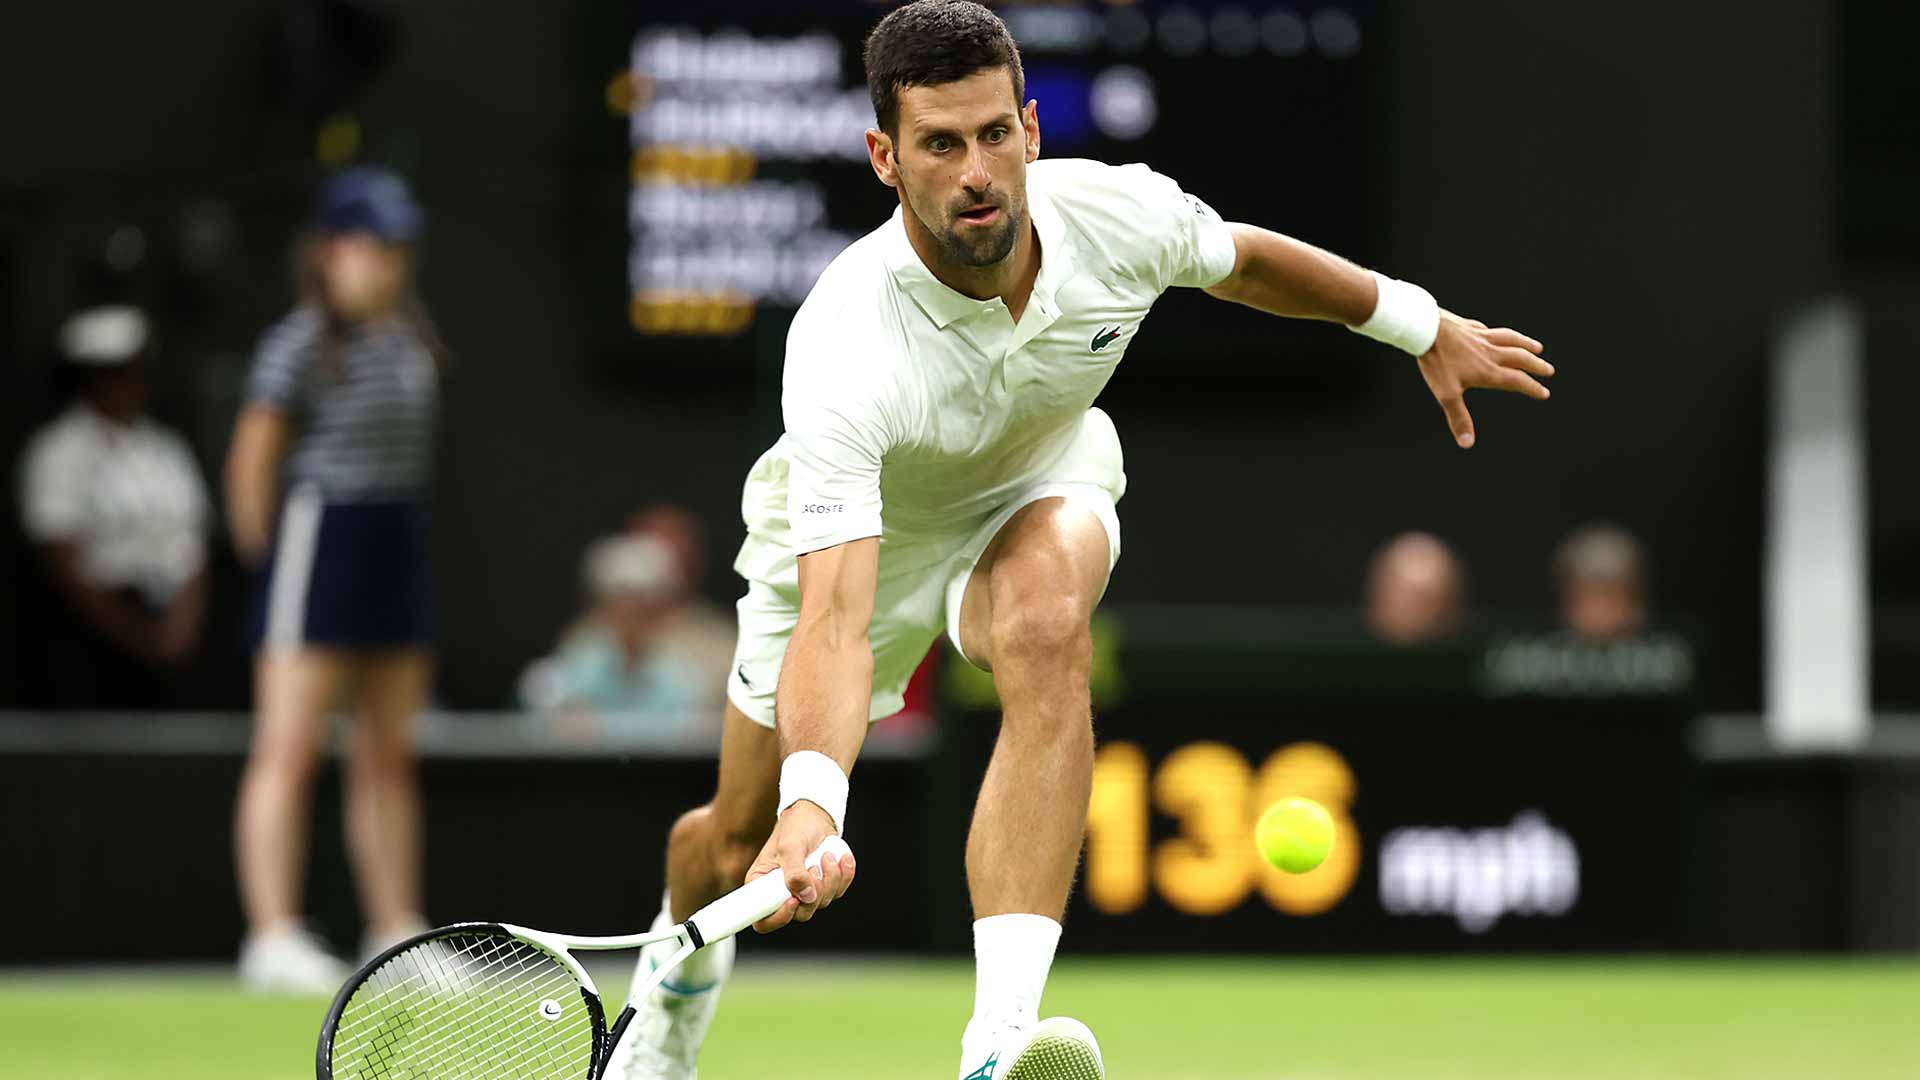 Novak Djokovic is pursuing his record-tying eighth Wimbledon title this fortnight.